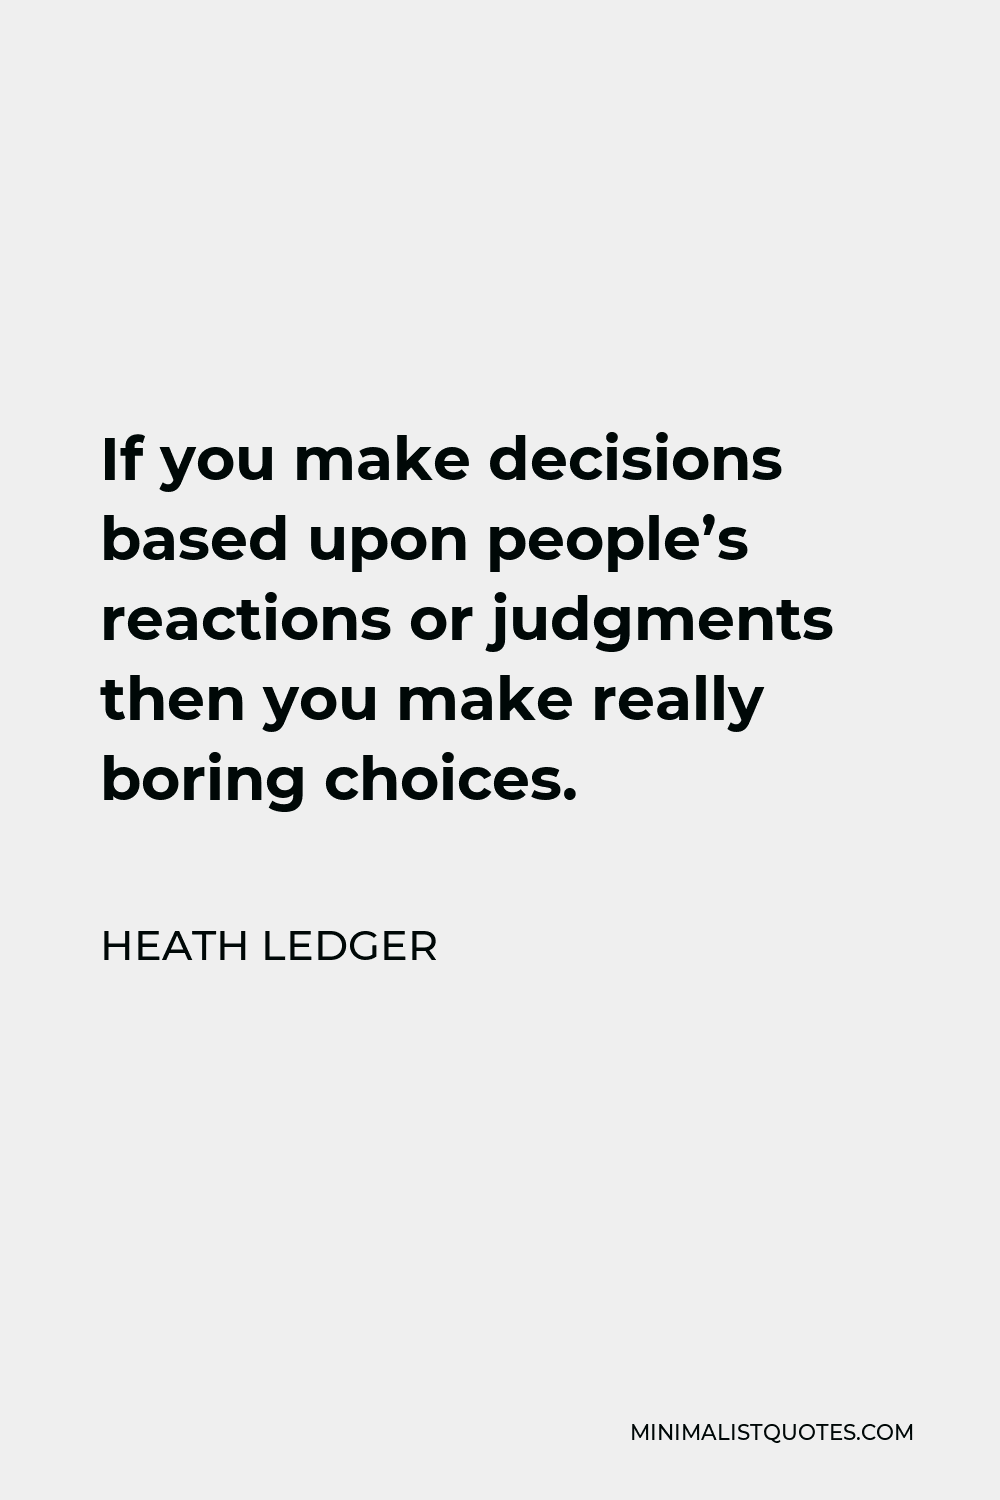 Heath Ledger Quote - If you make decisions based upon people’s reactions or judgments then you make really boring choices.